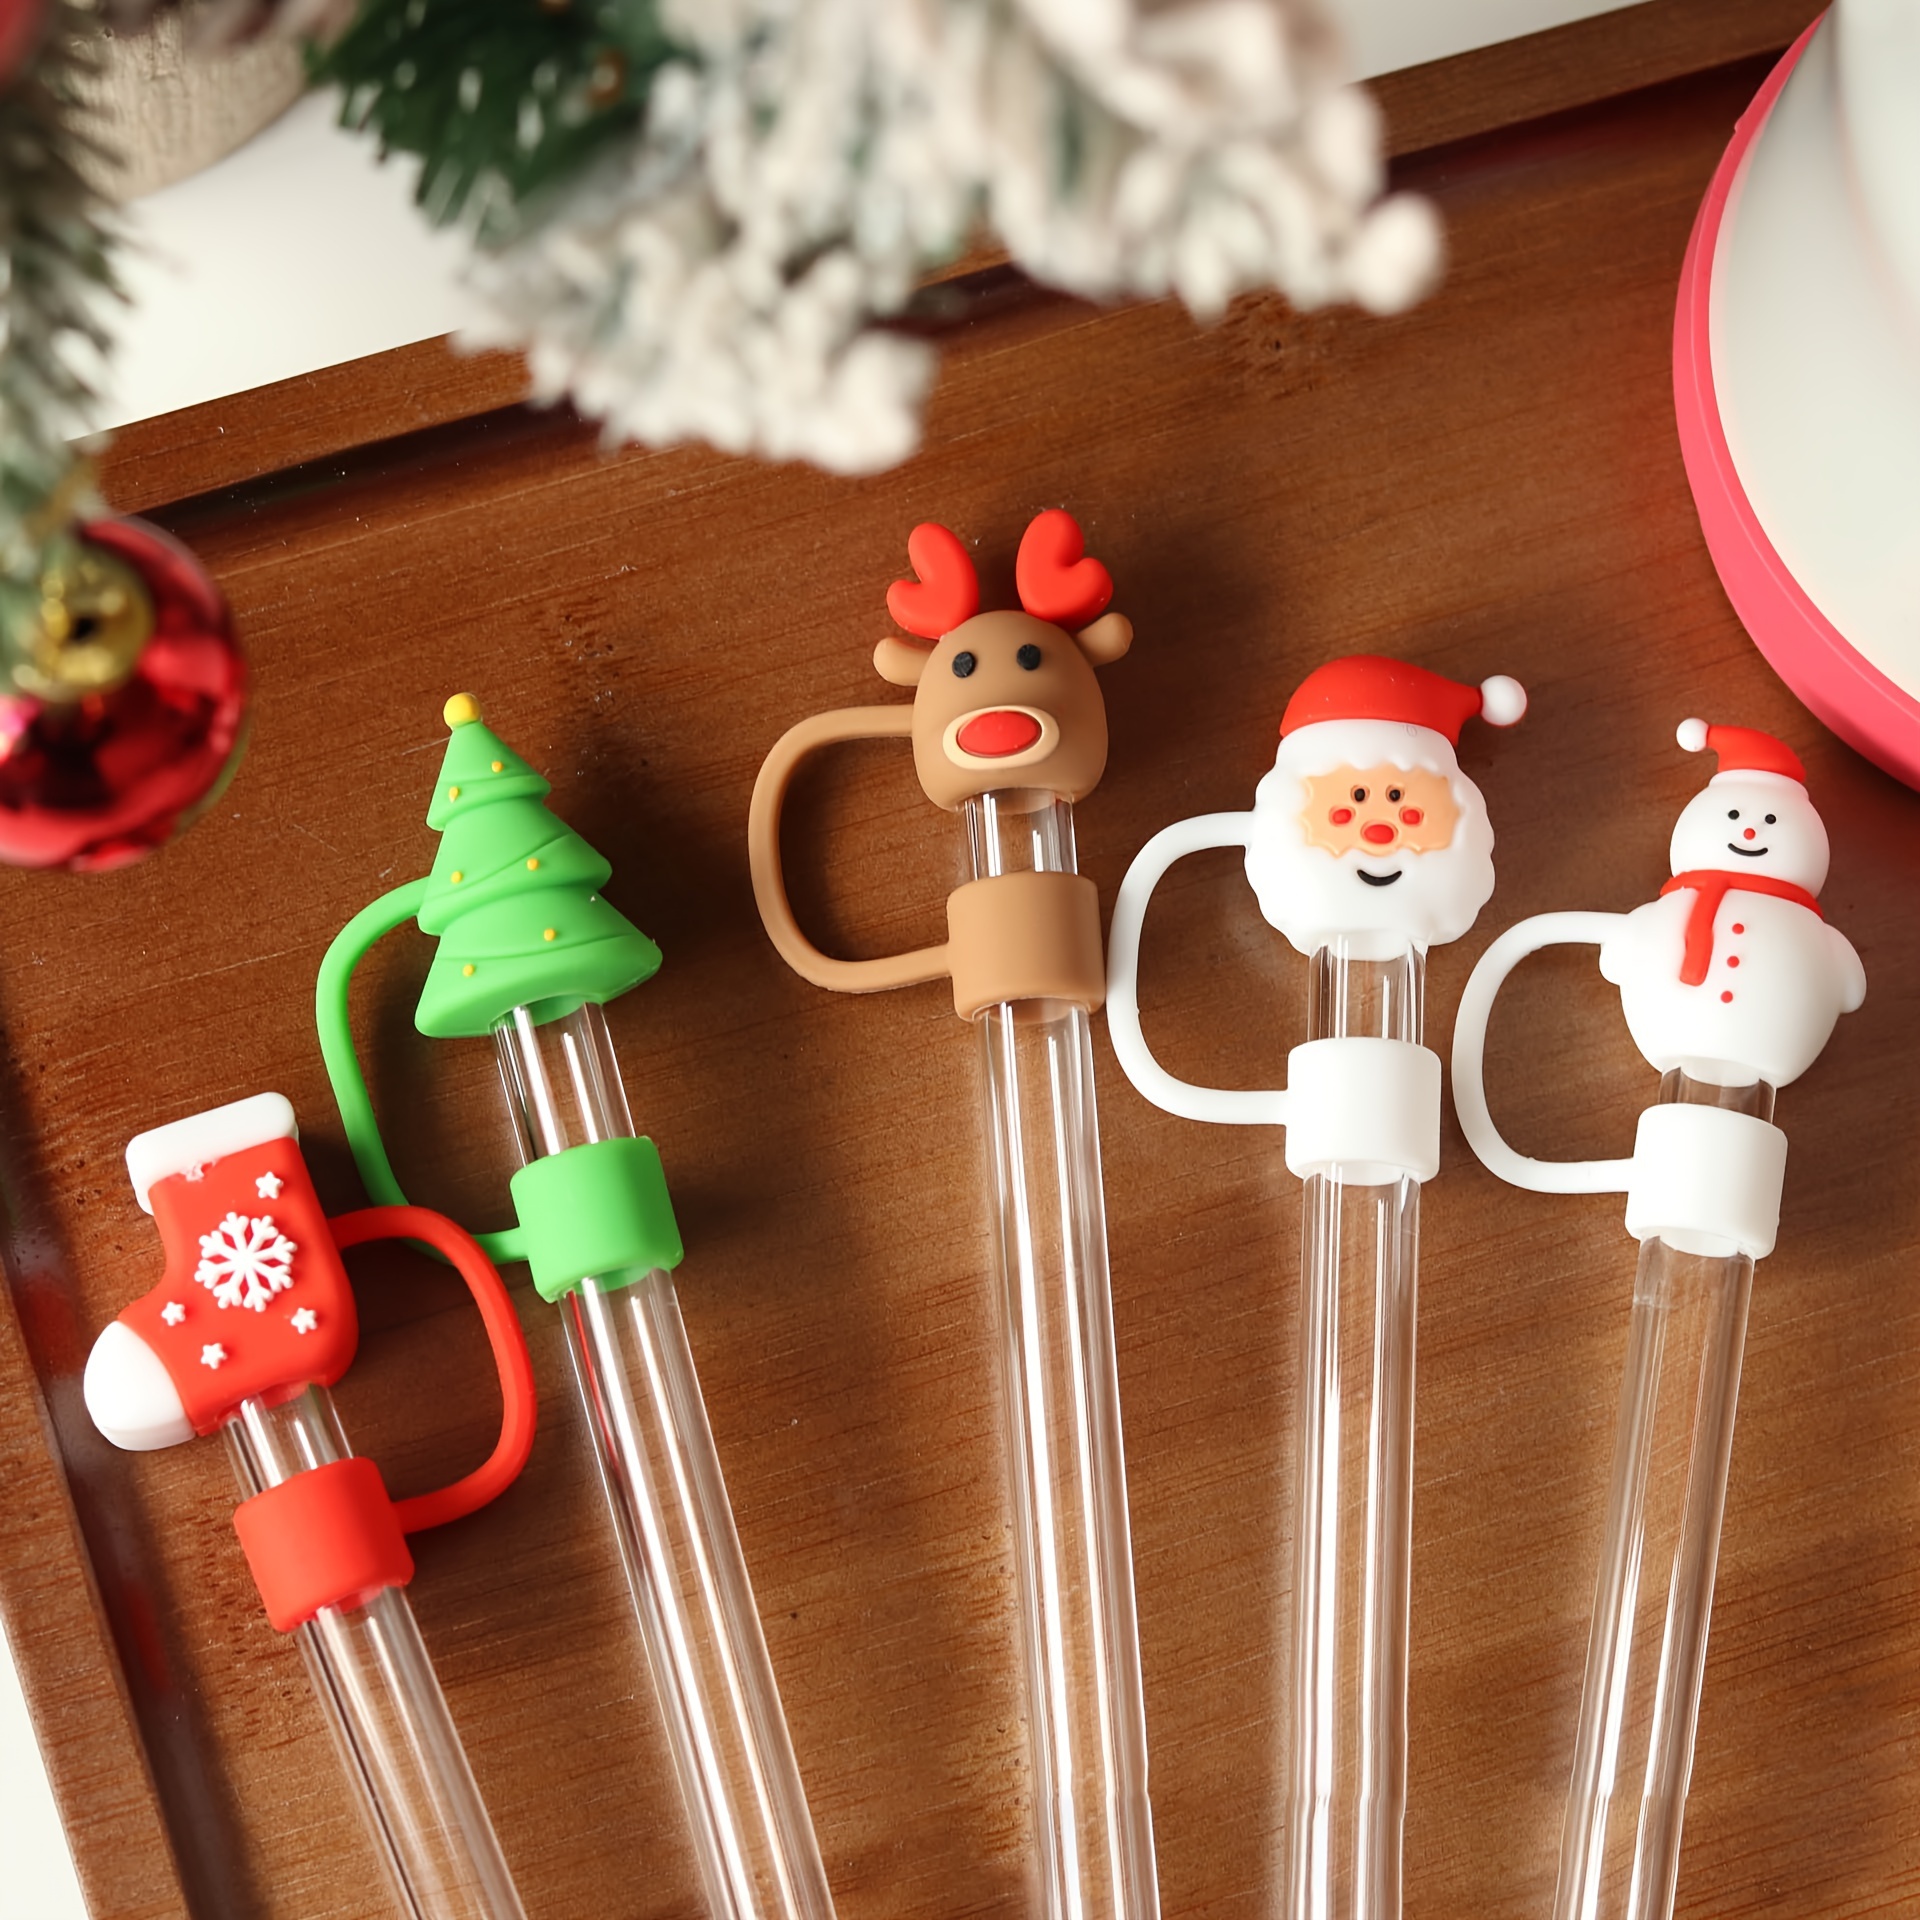 

5-pack Christmas Silicone Straw Toppers, 10mm Dustproof Caps For Stanley Cups - Festive Drink Accessories